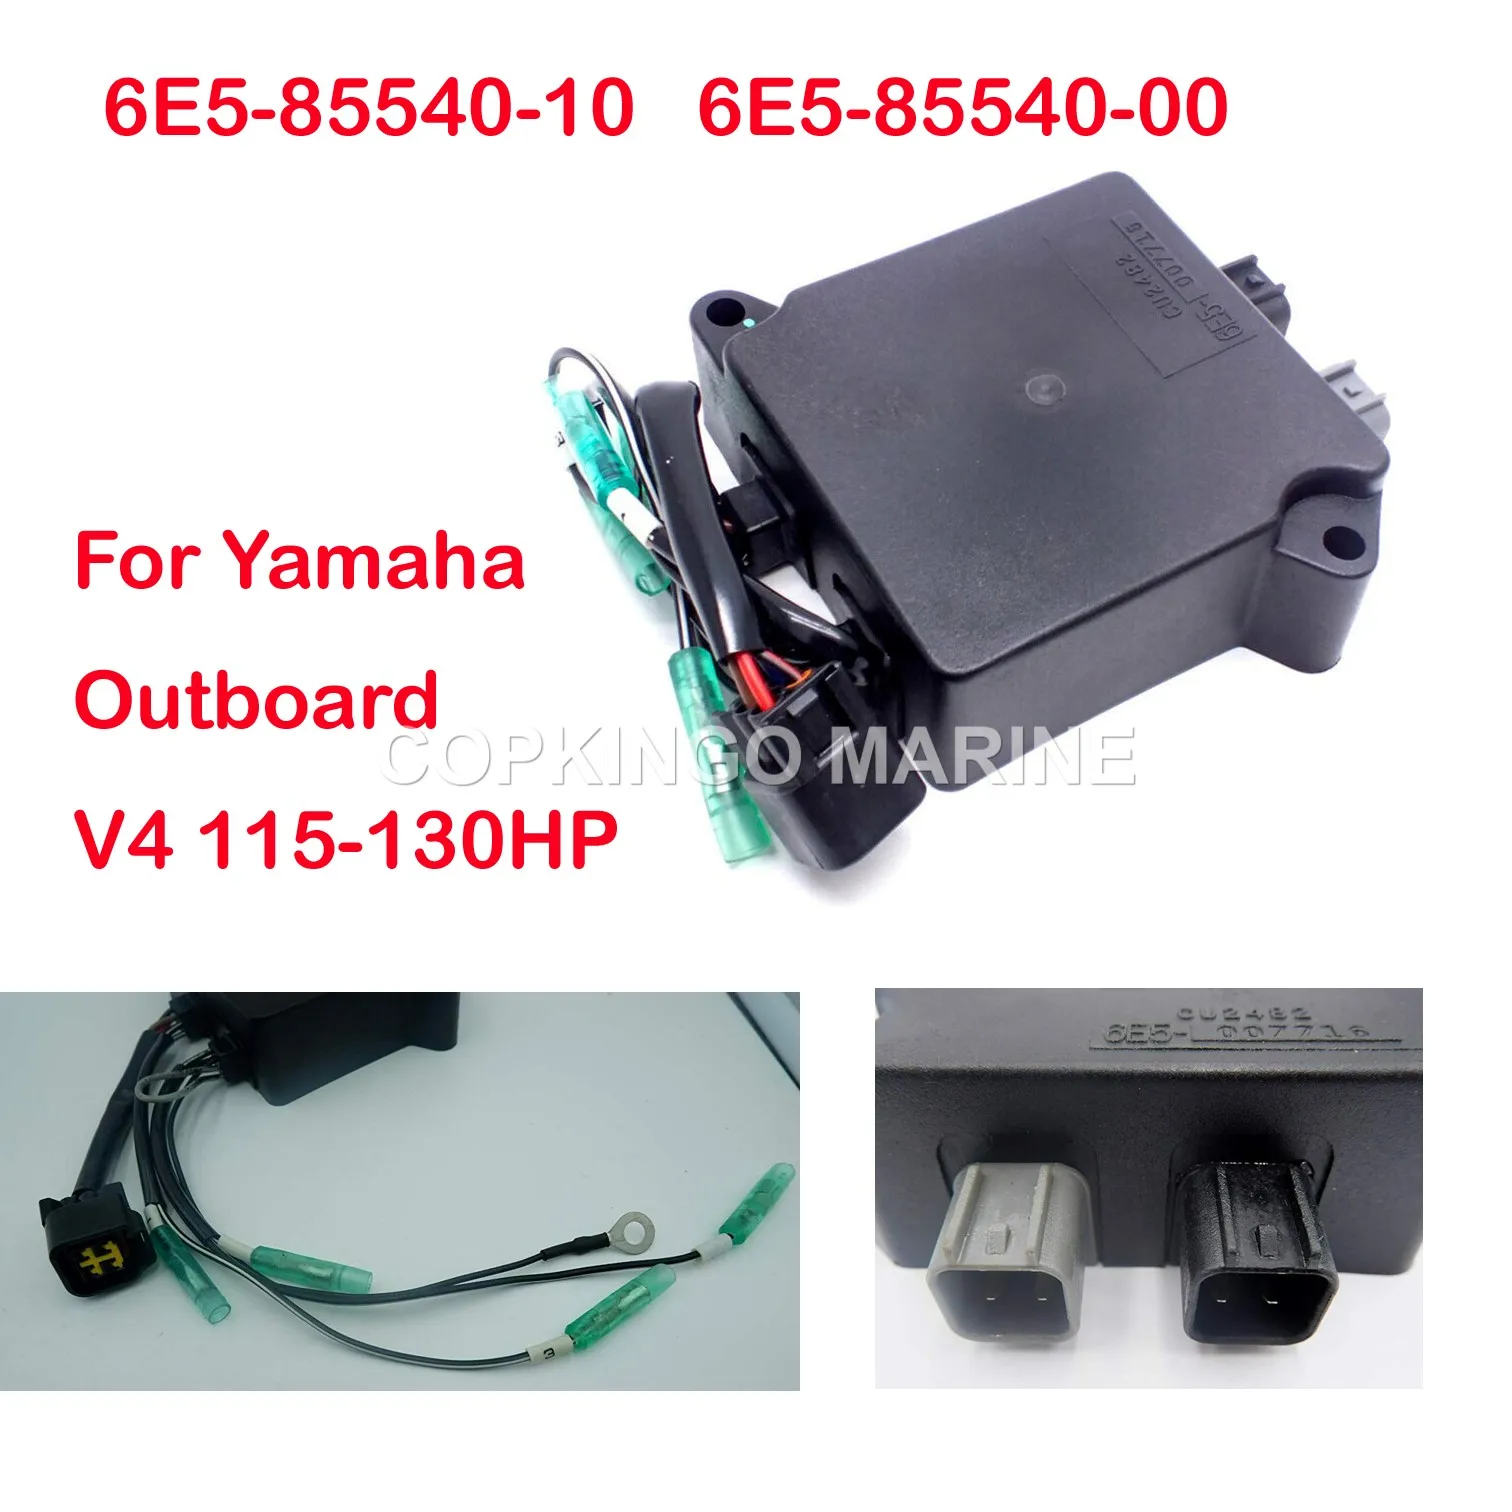 

Boat Ignition Coil Assy for YAMAHA Outboard Engine Motor V4 115HP 130HP 6E5-85540-00